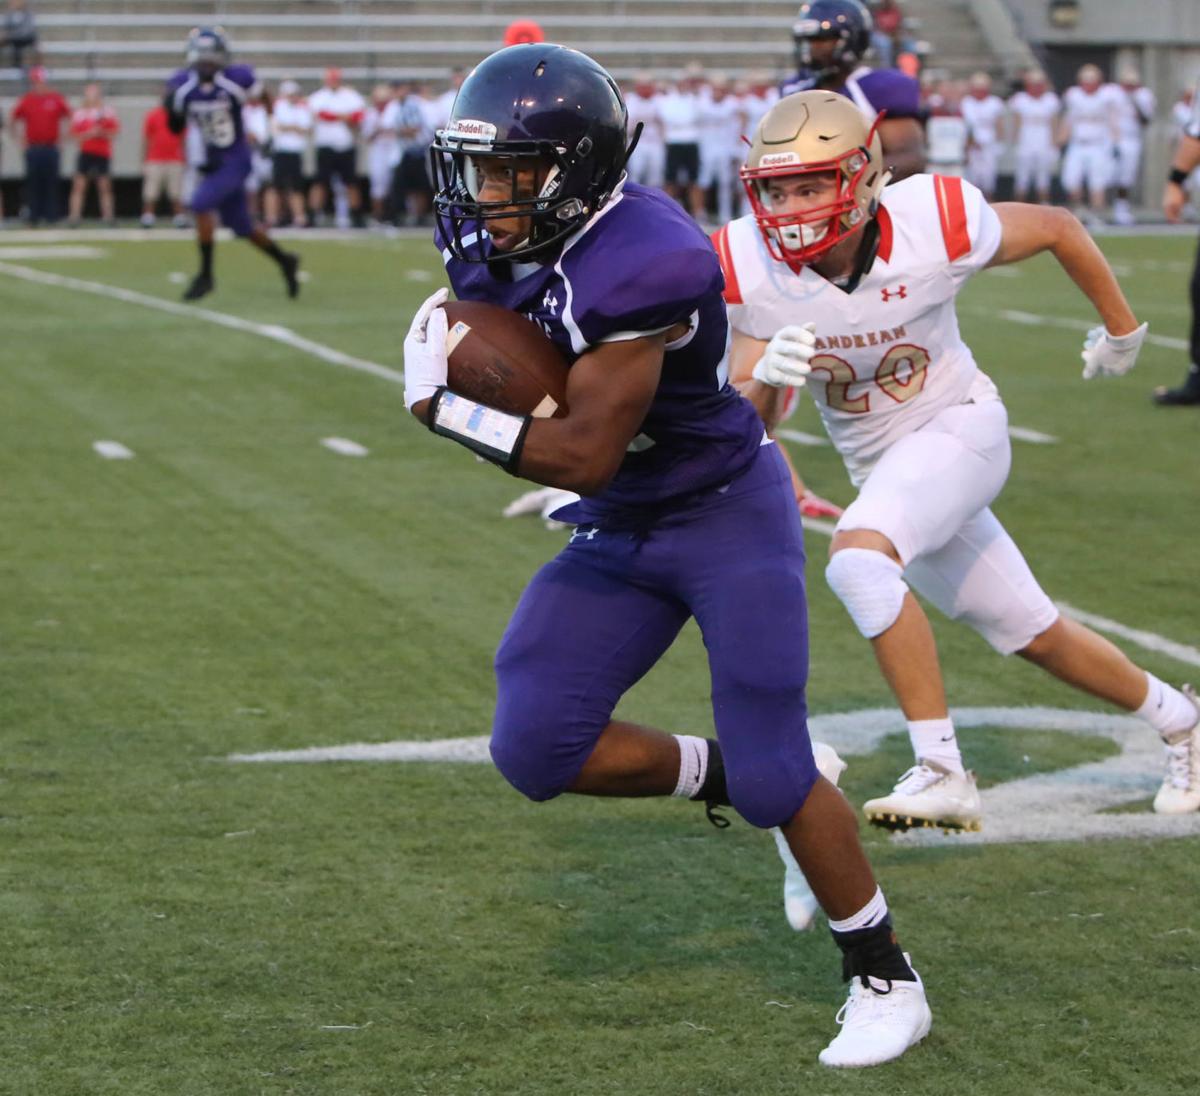 PREP FOOTBALL: Merrillville matches win total from last year, downs